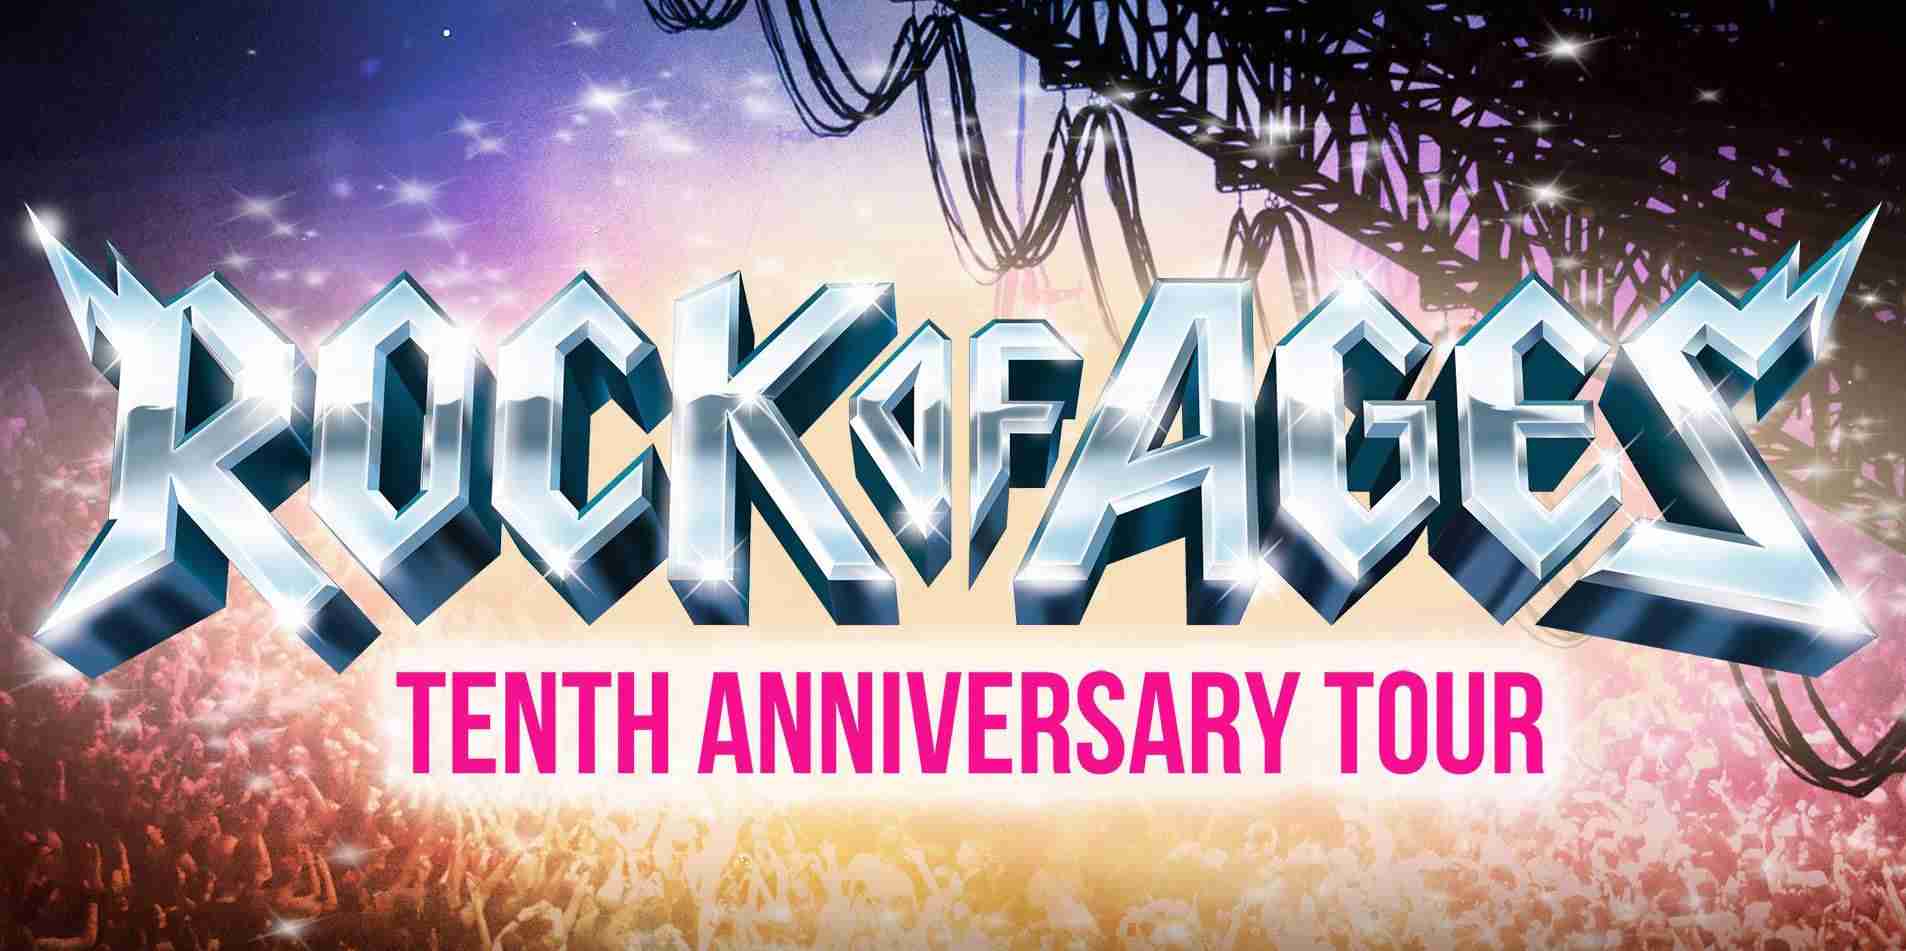 Rock Of Ages 10th Anniversary tour.